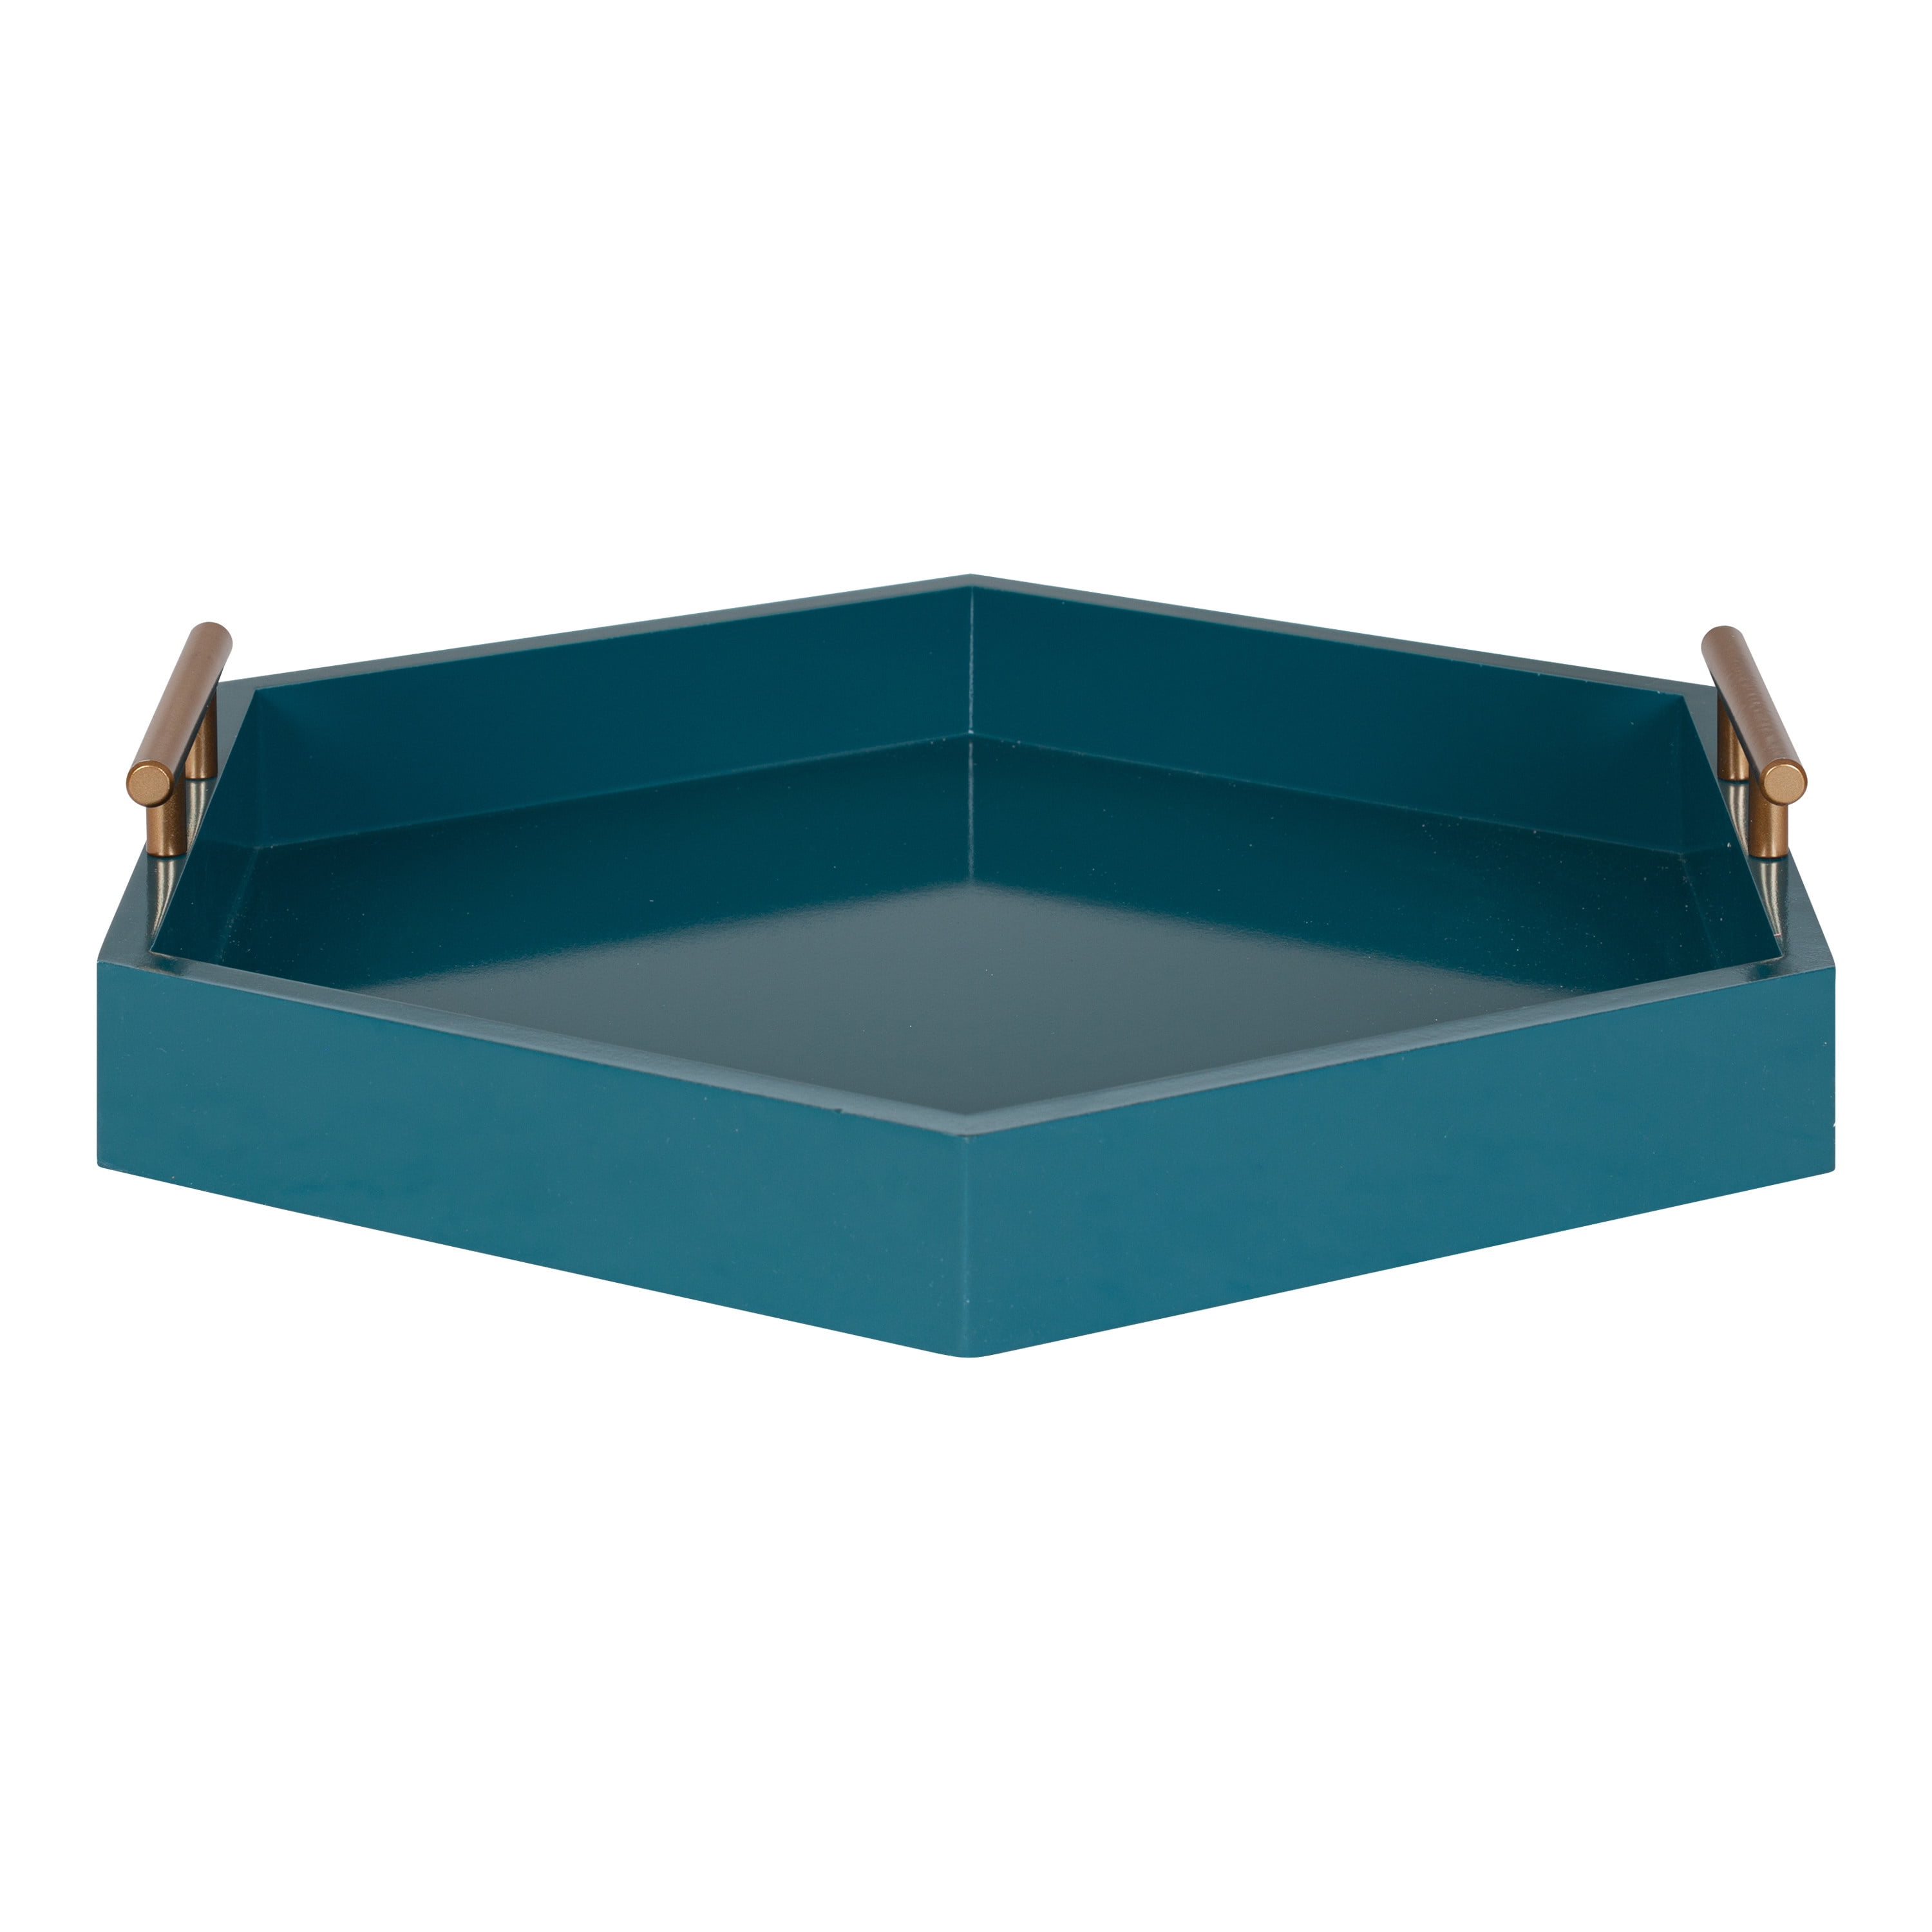 Kate and Laurel Lipton Hexagon Decorative Tray with Polished Metal